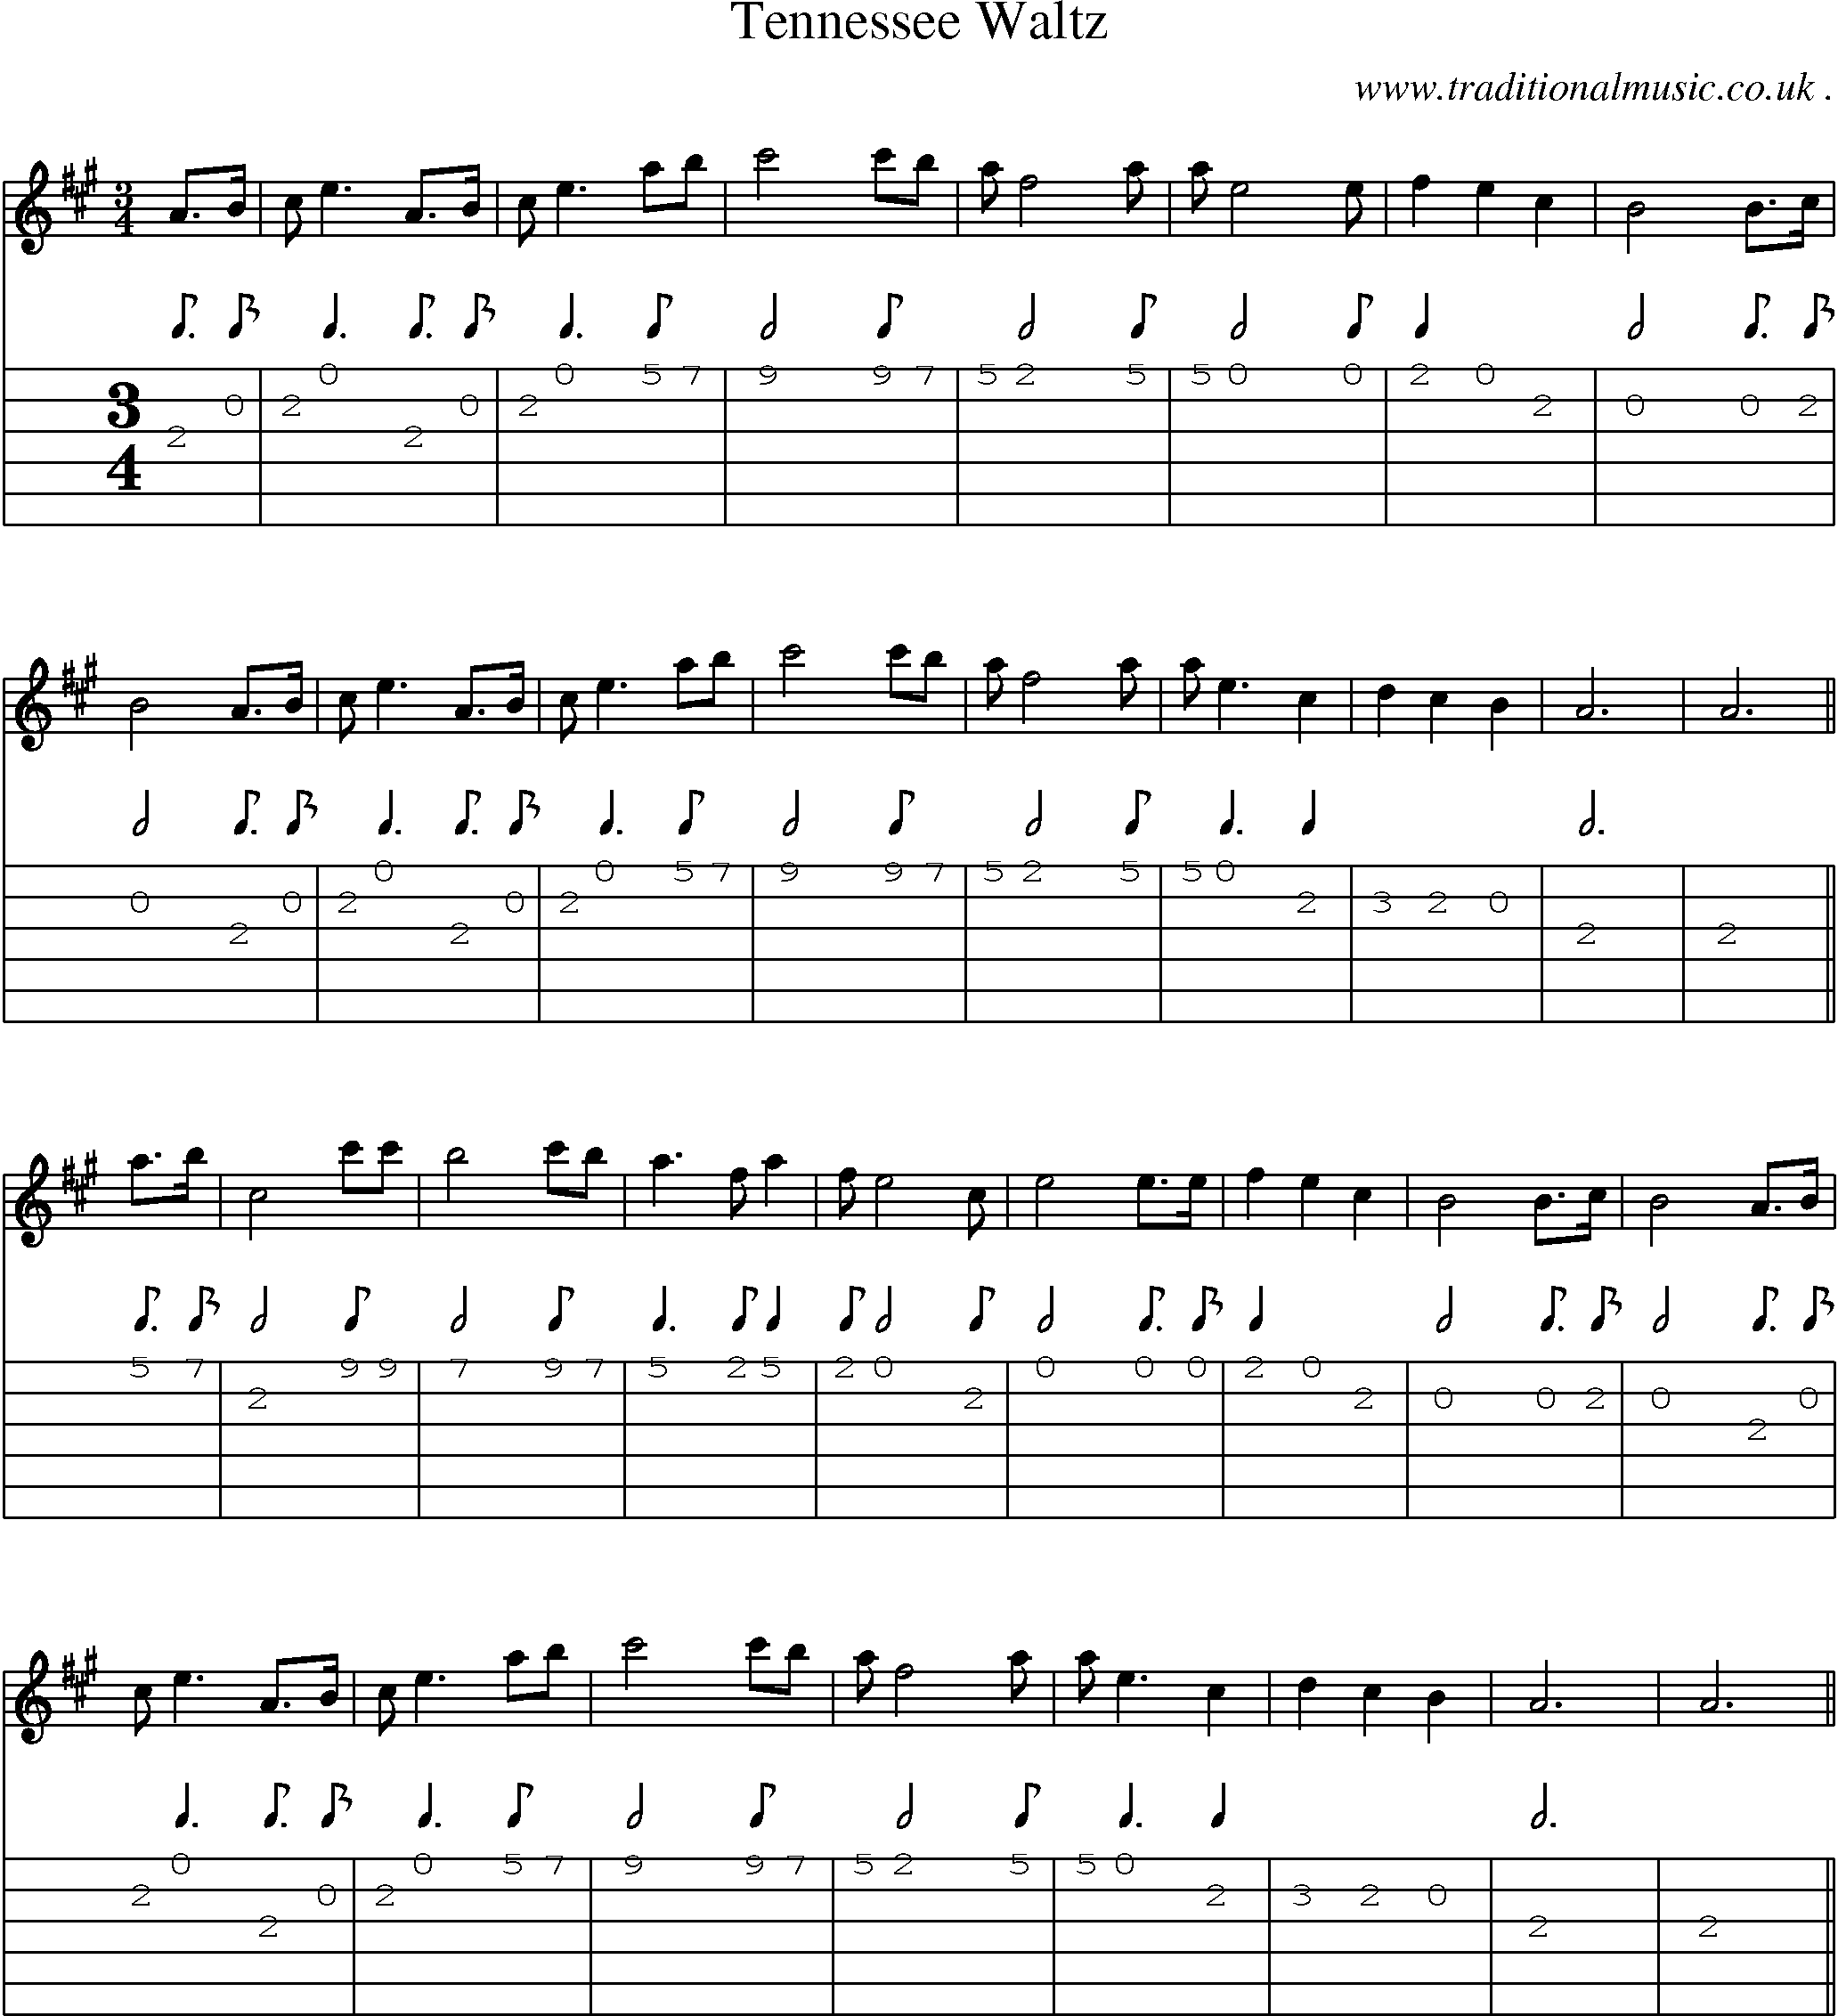 Sheet-Music and Guitar Tabs for Tennessee Waltz.